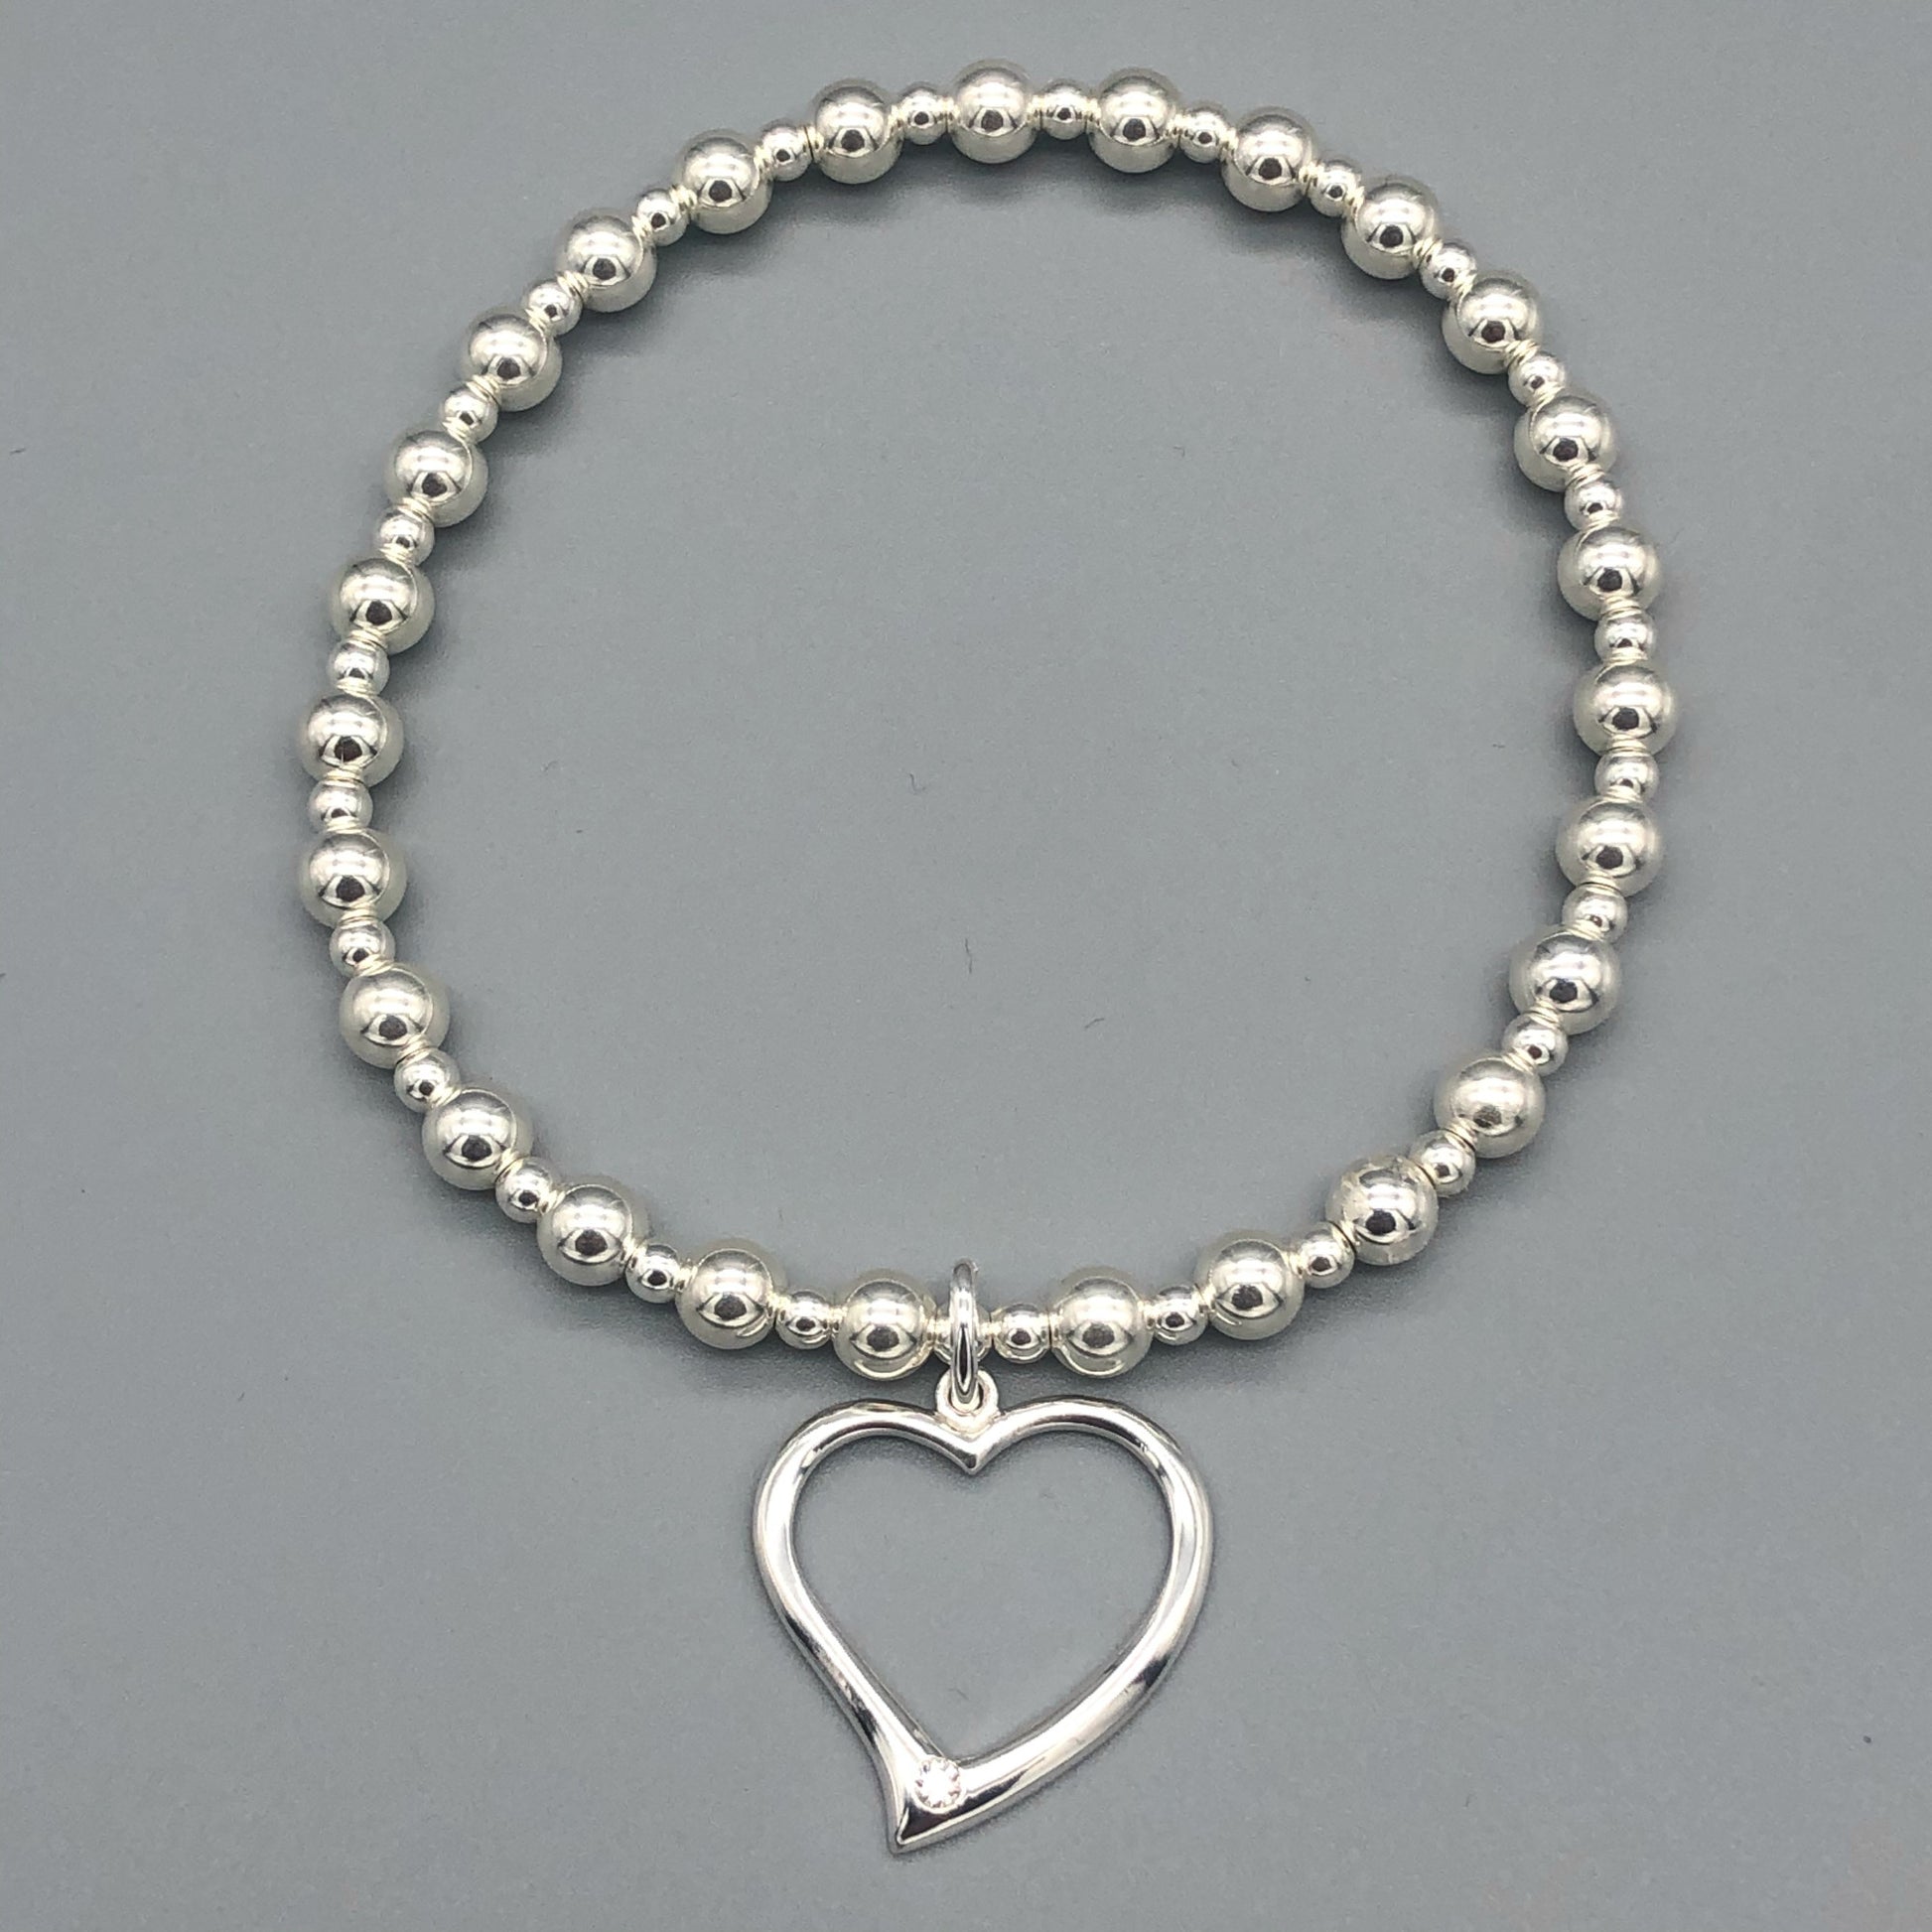 Large open heart sterling silver stacking charm bracelet by My Silver Wish